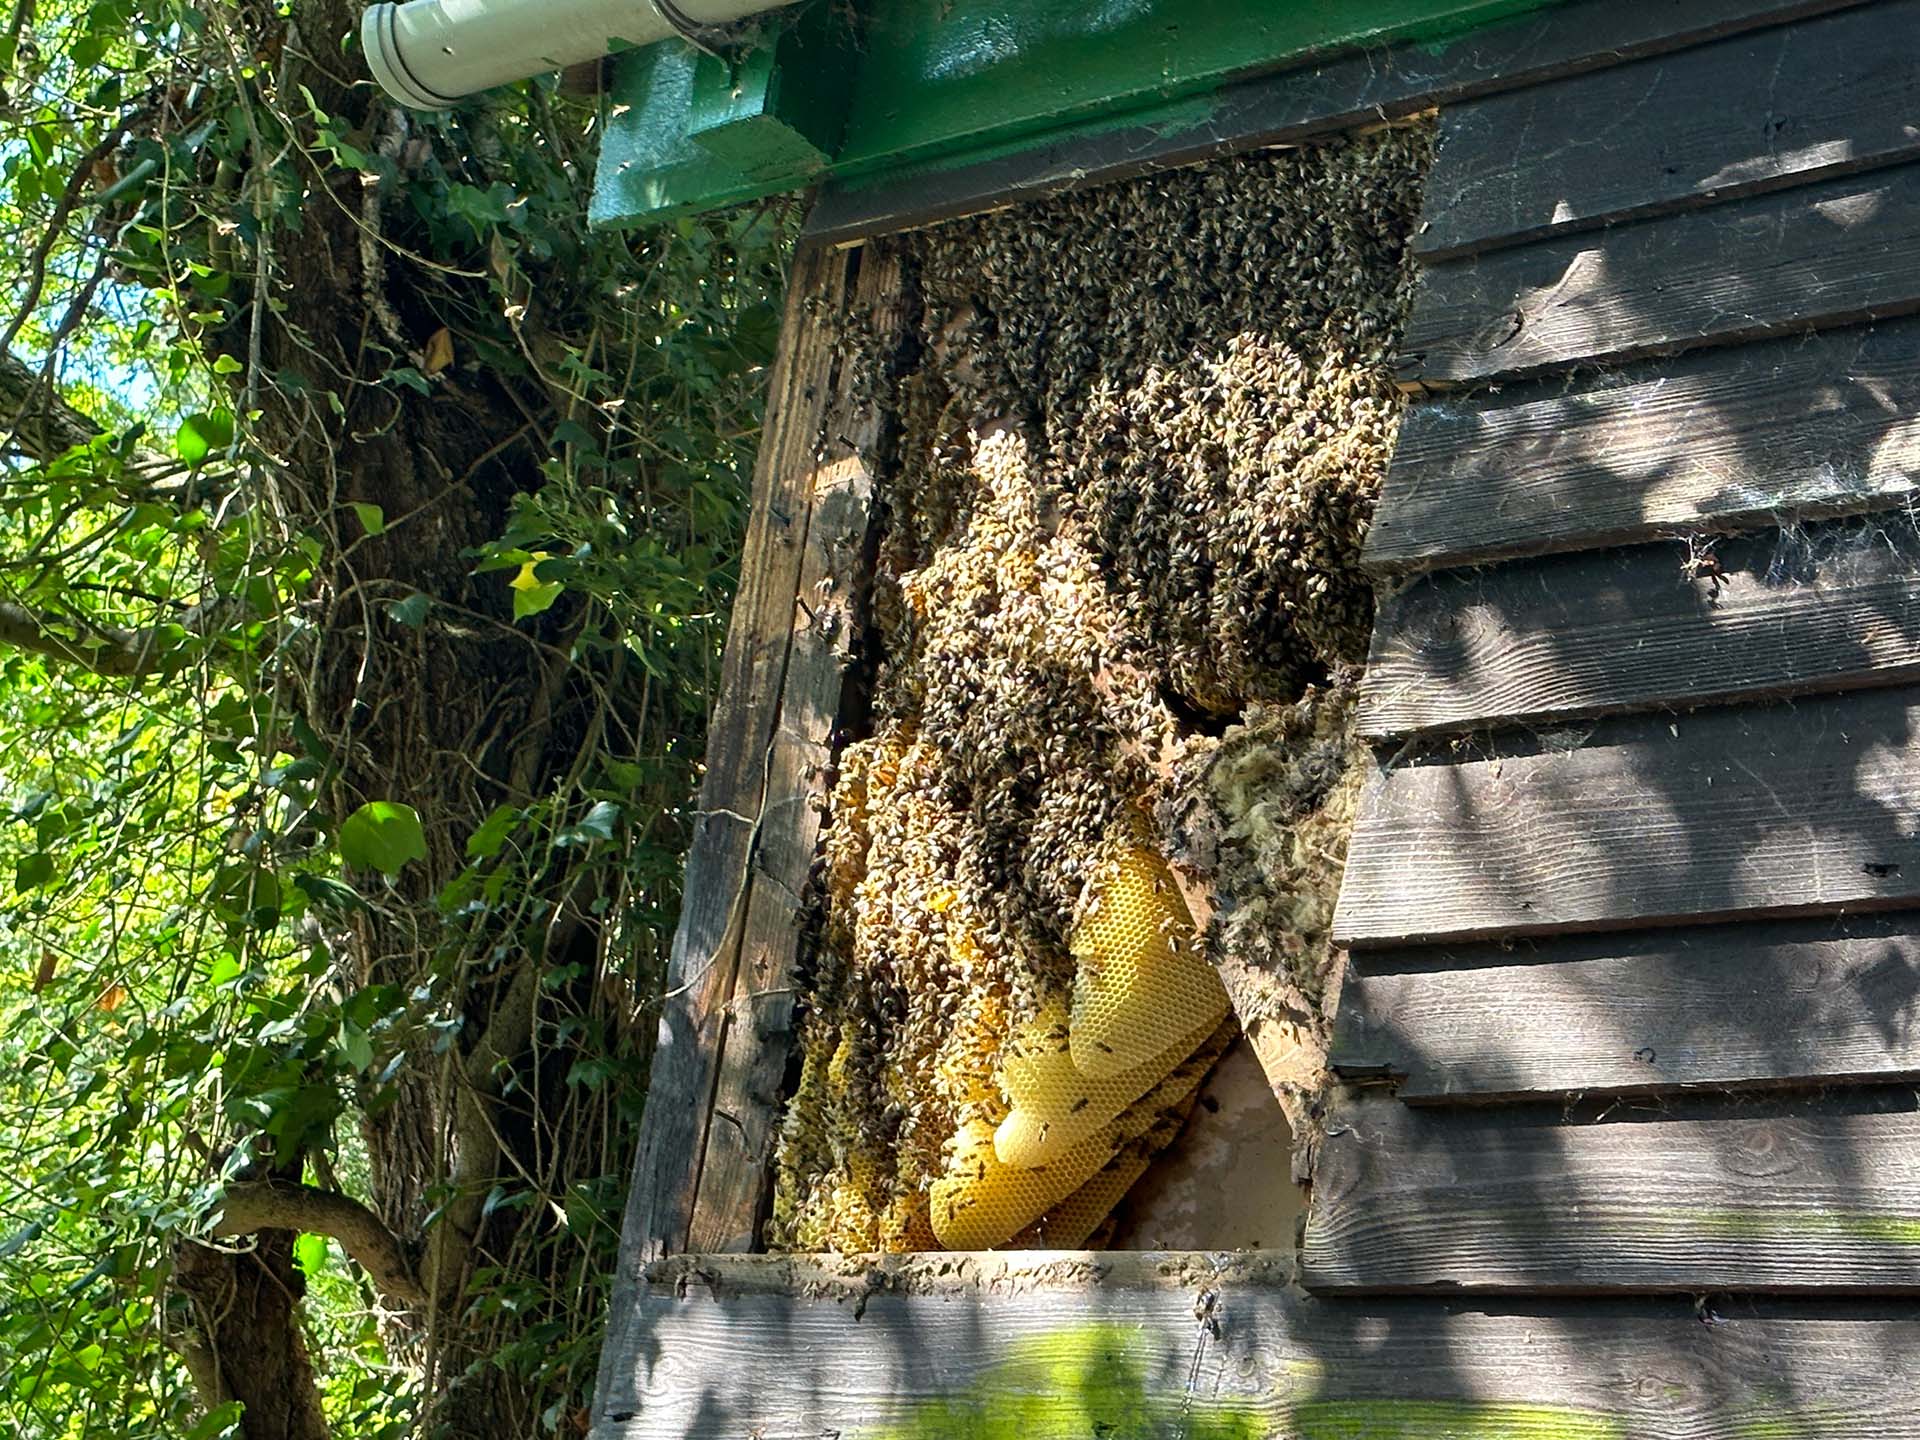 bees in buildings, picture shows a large honeycomb present in a domestic building